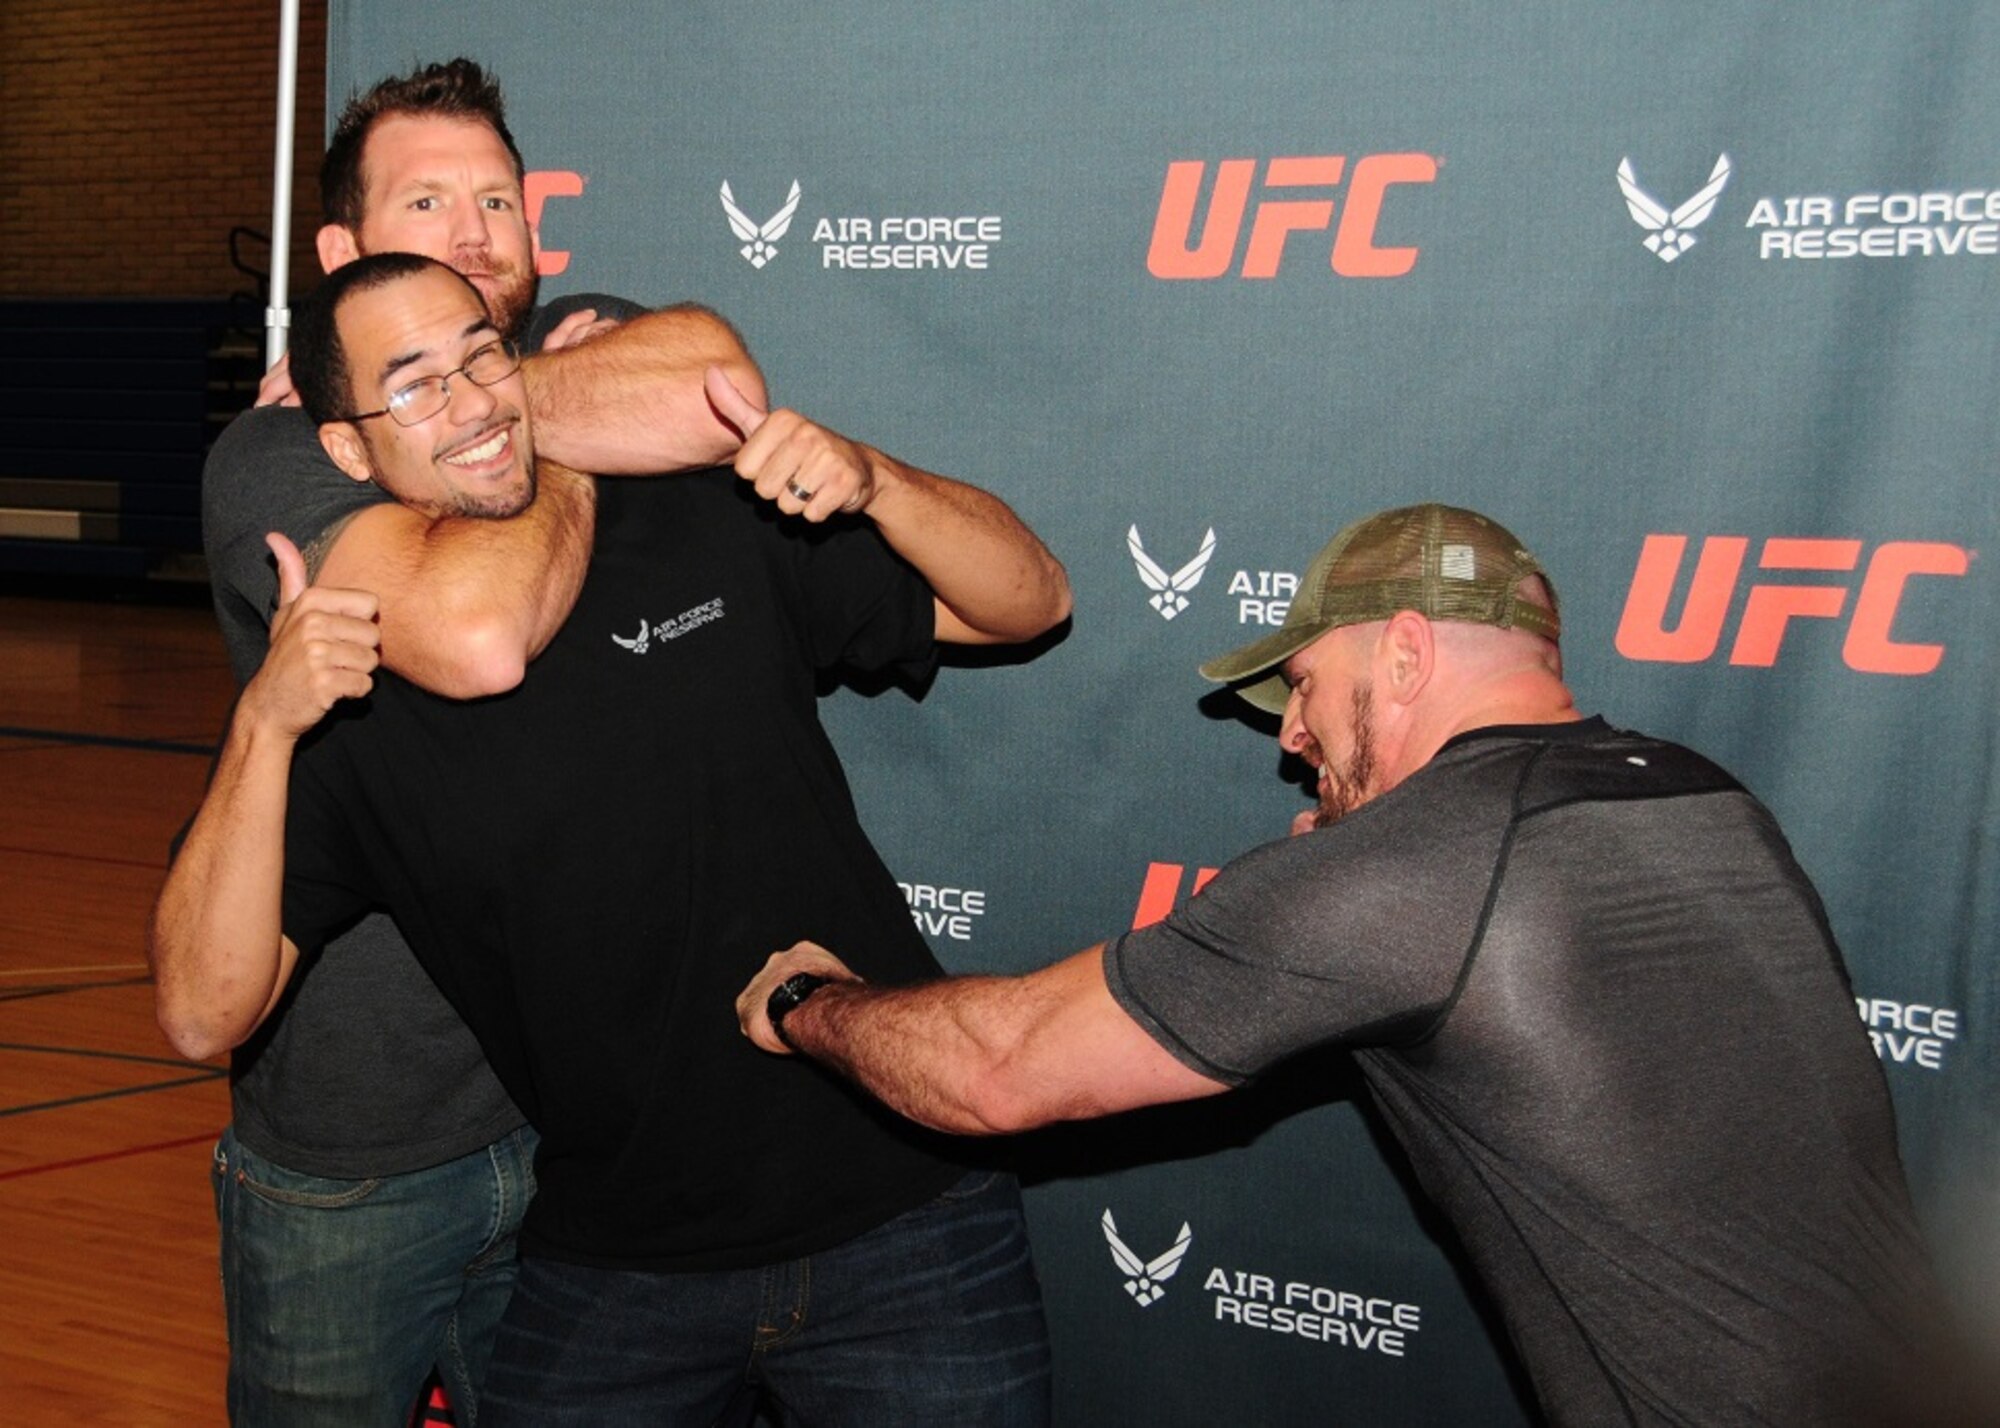 Mr. Jerrus Wagstaff, spouse, is put in a choke hold by Ryan “Darth” Bader, Ultimate Fighting Champion fighter and Mike Dolce, UFC fit coach, pretends to punch Mar 21 during the UFC Fitness Tour 2015 at the Bryant Fitness Center, Luke Air Force Base, Ariz. (U.S. Air Force photo taken by Tech. Sgt. Louis Vega Jr.)
